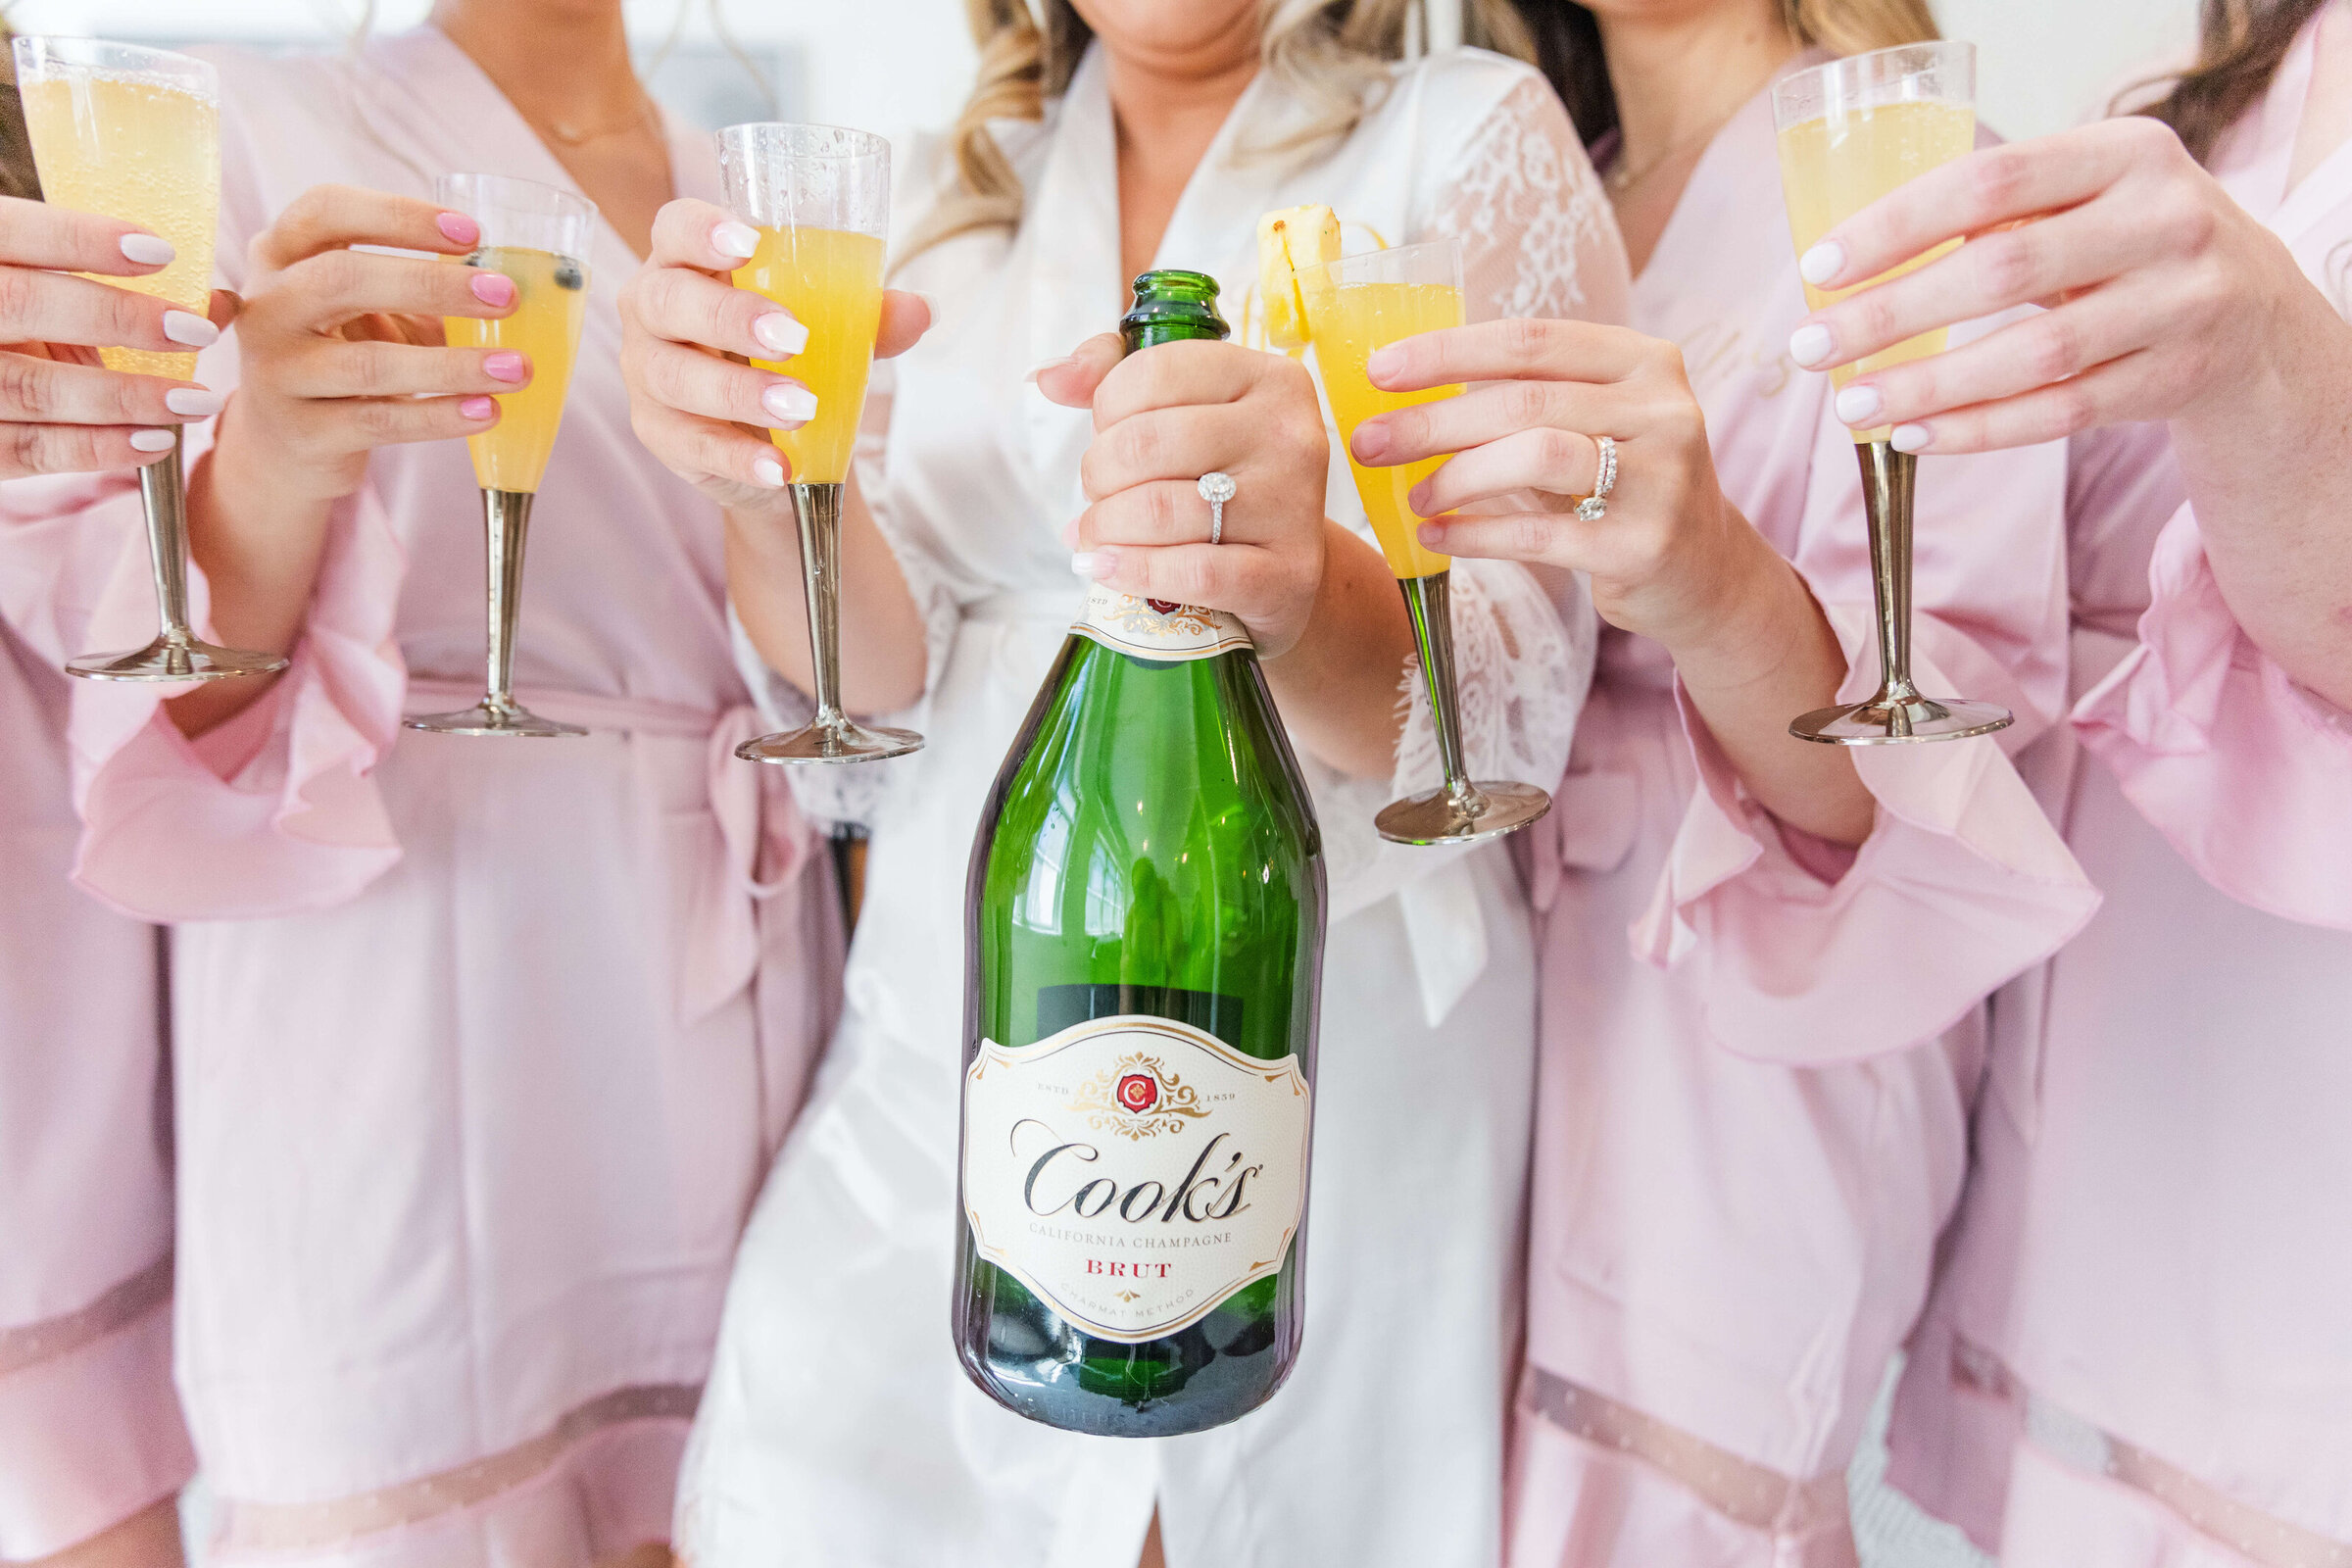 A bride is in a white robe and holds up a bottle of champagne while bridesmaids in pink robes hold up their mimosas